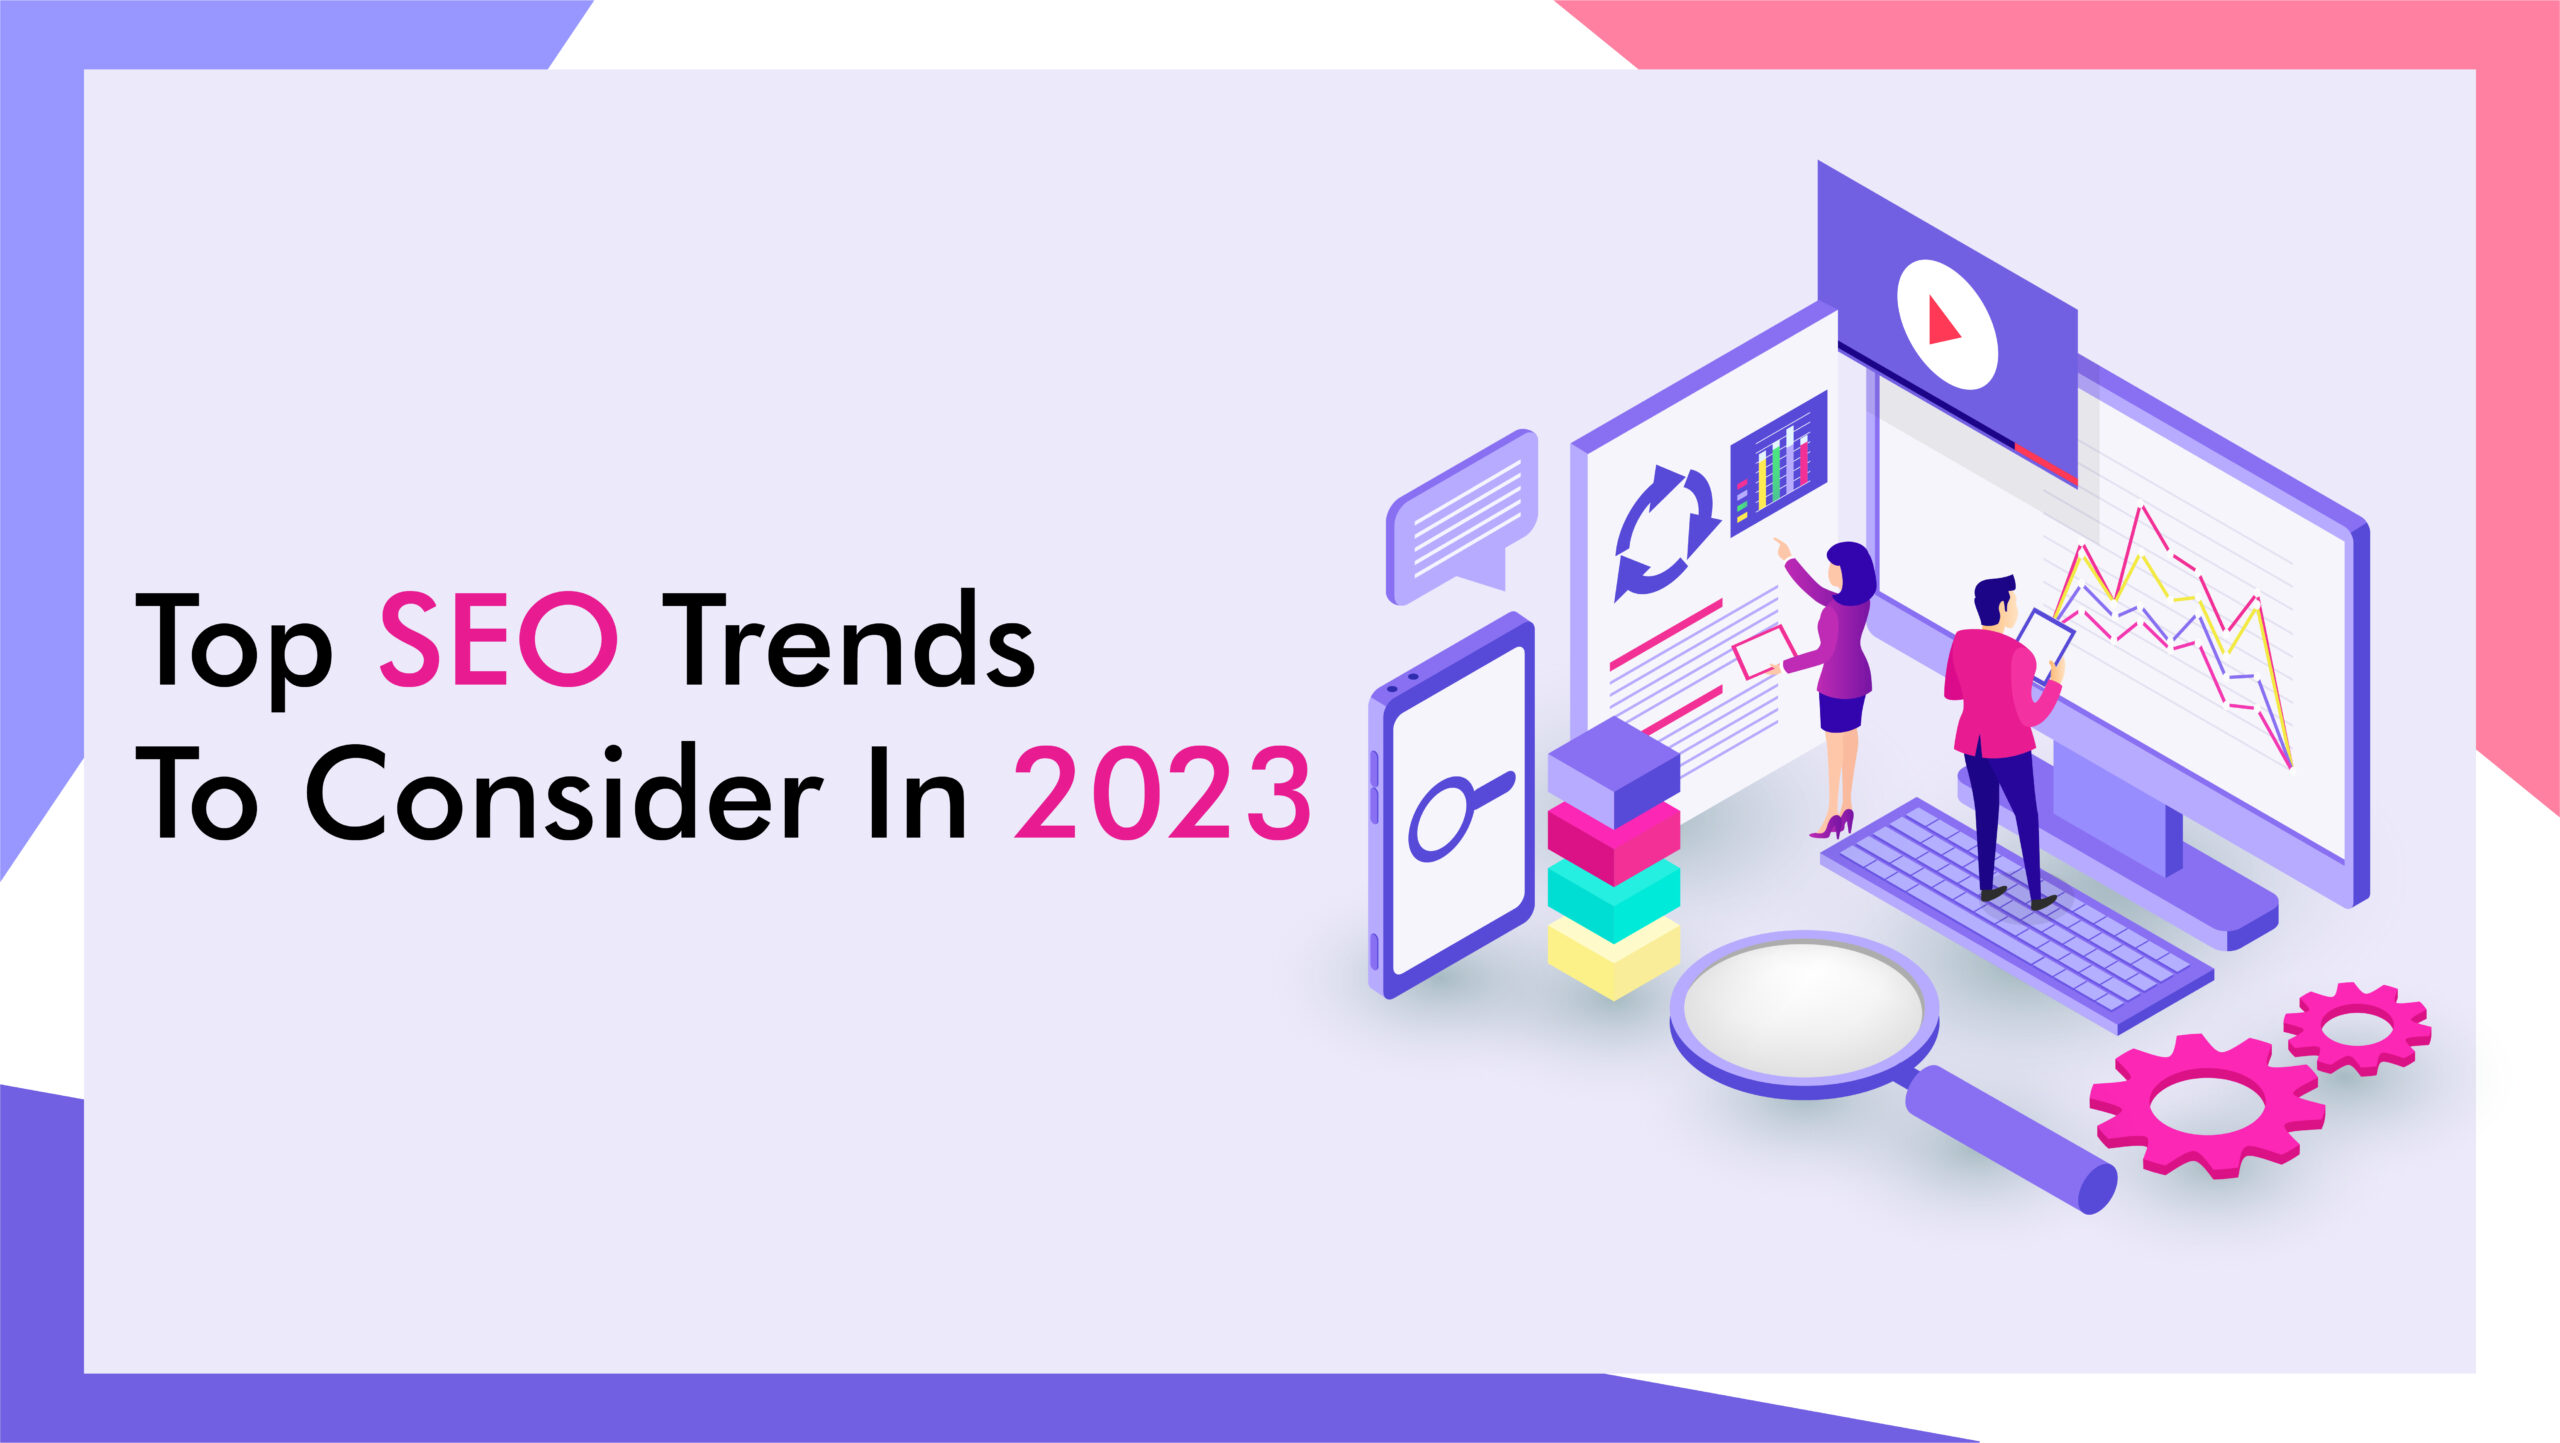 SEO trends 2023 01 01 scaled